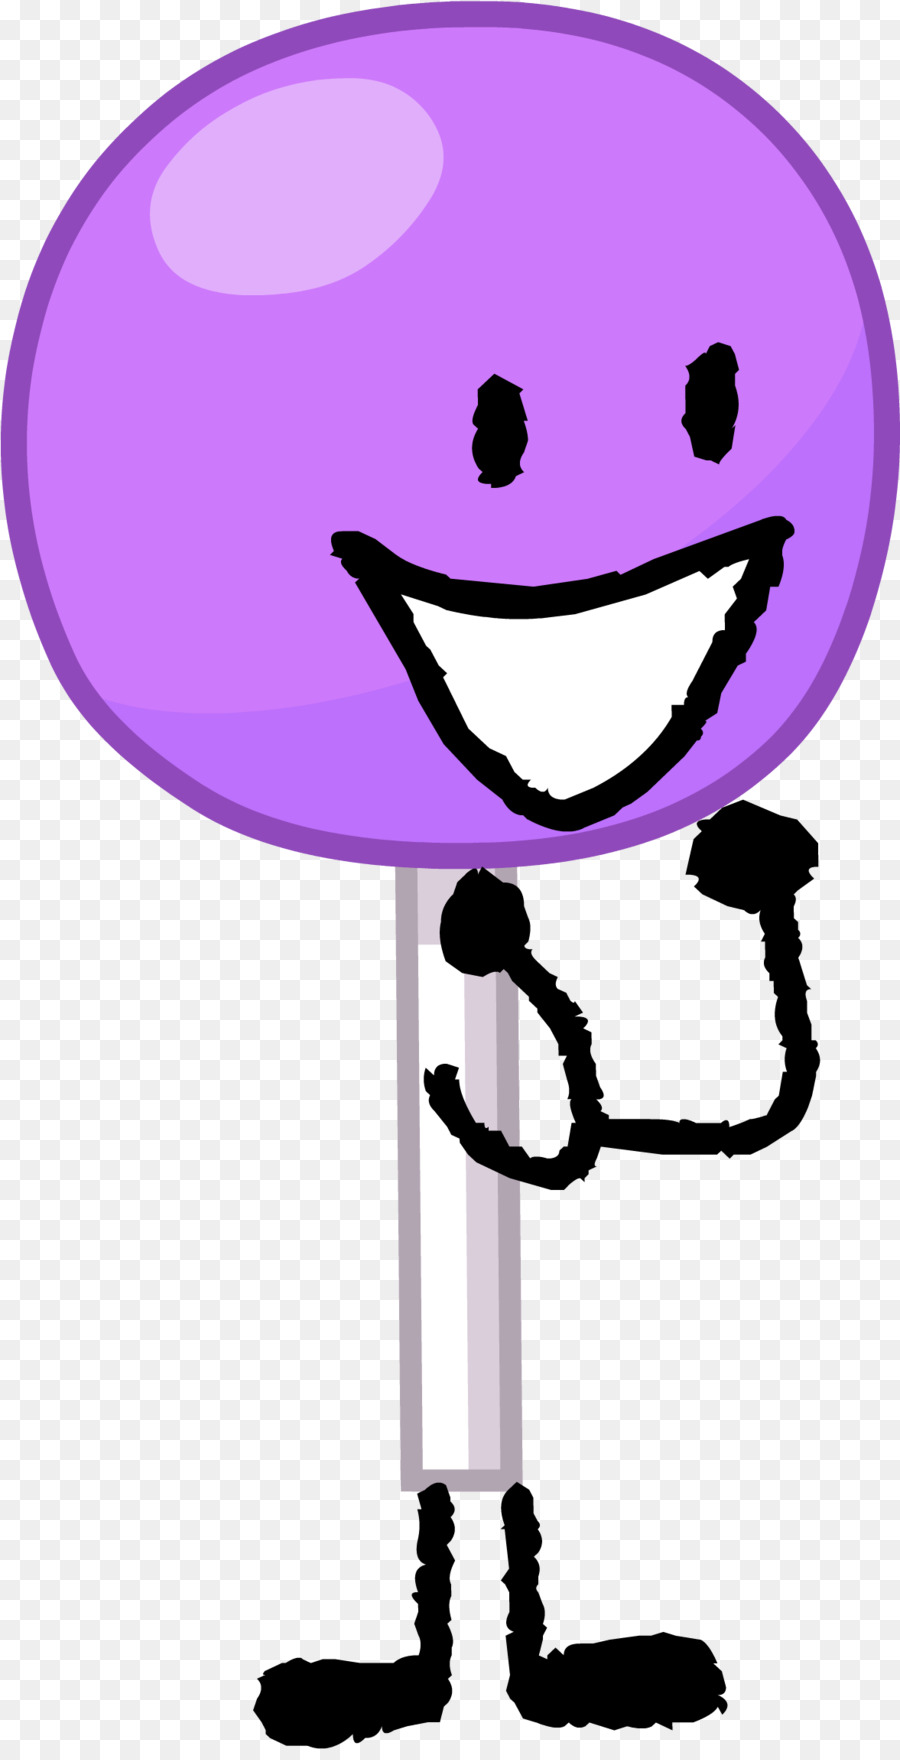 Schlacht um die Trauminsel Wiki Image Character Art - bfdi png bfb